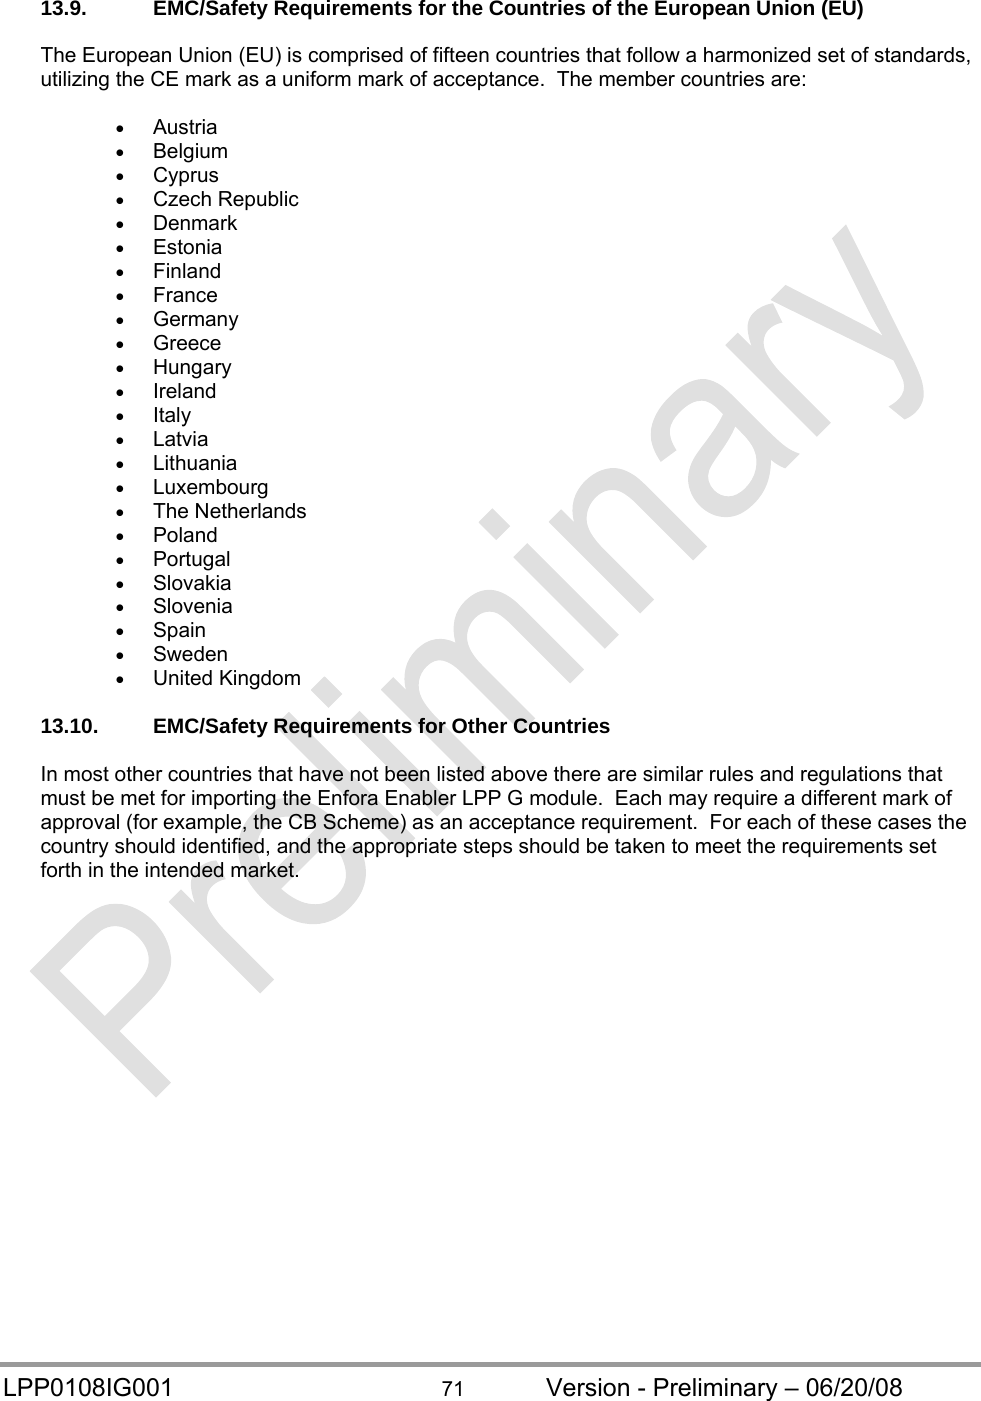  LPP0108IG001  71  Version - Preliminary – 06/20/08 13.9.  EMC/Safety Requirements for the Countries of the European Union (EU)  The European Union (EU) is comprised of fifteen countries that follow a harmonized set of standards, utilizing the CE mark as a uniform mark of acceptance.  The member countries are:   Austria  Belgium  Cyprus  Czech Republic  Denmark  Estonia  Finland  France  Germany  Greece  Hungary  Ireland  Italy  Latvia  Lithuania  Luxembourg  The Netherlands  Poland  Portugal  Slovakia  Slovenia  Spain  Sweden  United Kingdom  13.10. EMC/Safety Requirements for Other Countries  In most other countries that have not been listed above there are similar rules and regulations that must be met for importing the Enfora Enabler LPP G module.  Each may require a different mark of approval (for example, the CB Scheme) as an acceptance requirement.  For each of these cases the country should identified, and the appropriate steps should be taken to meet the requirements set forth in the intended market.    